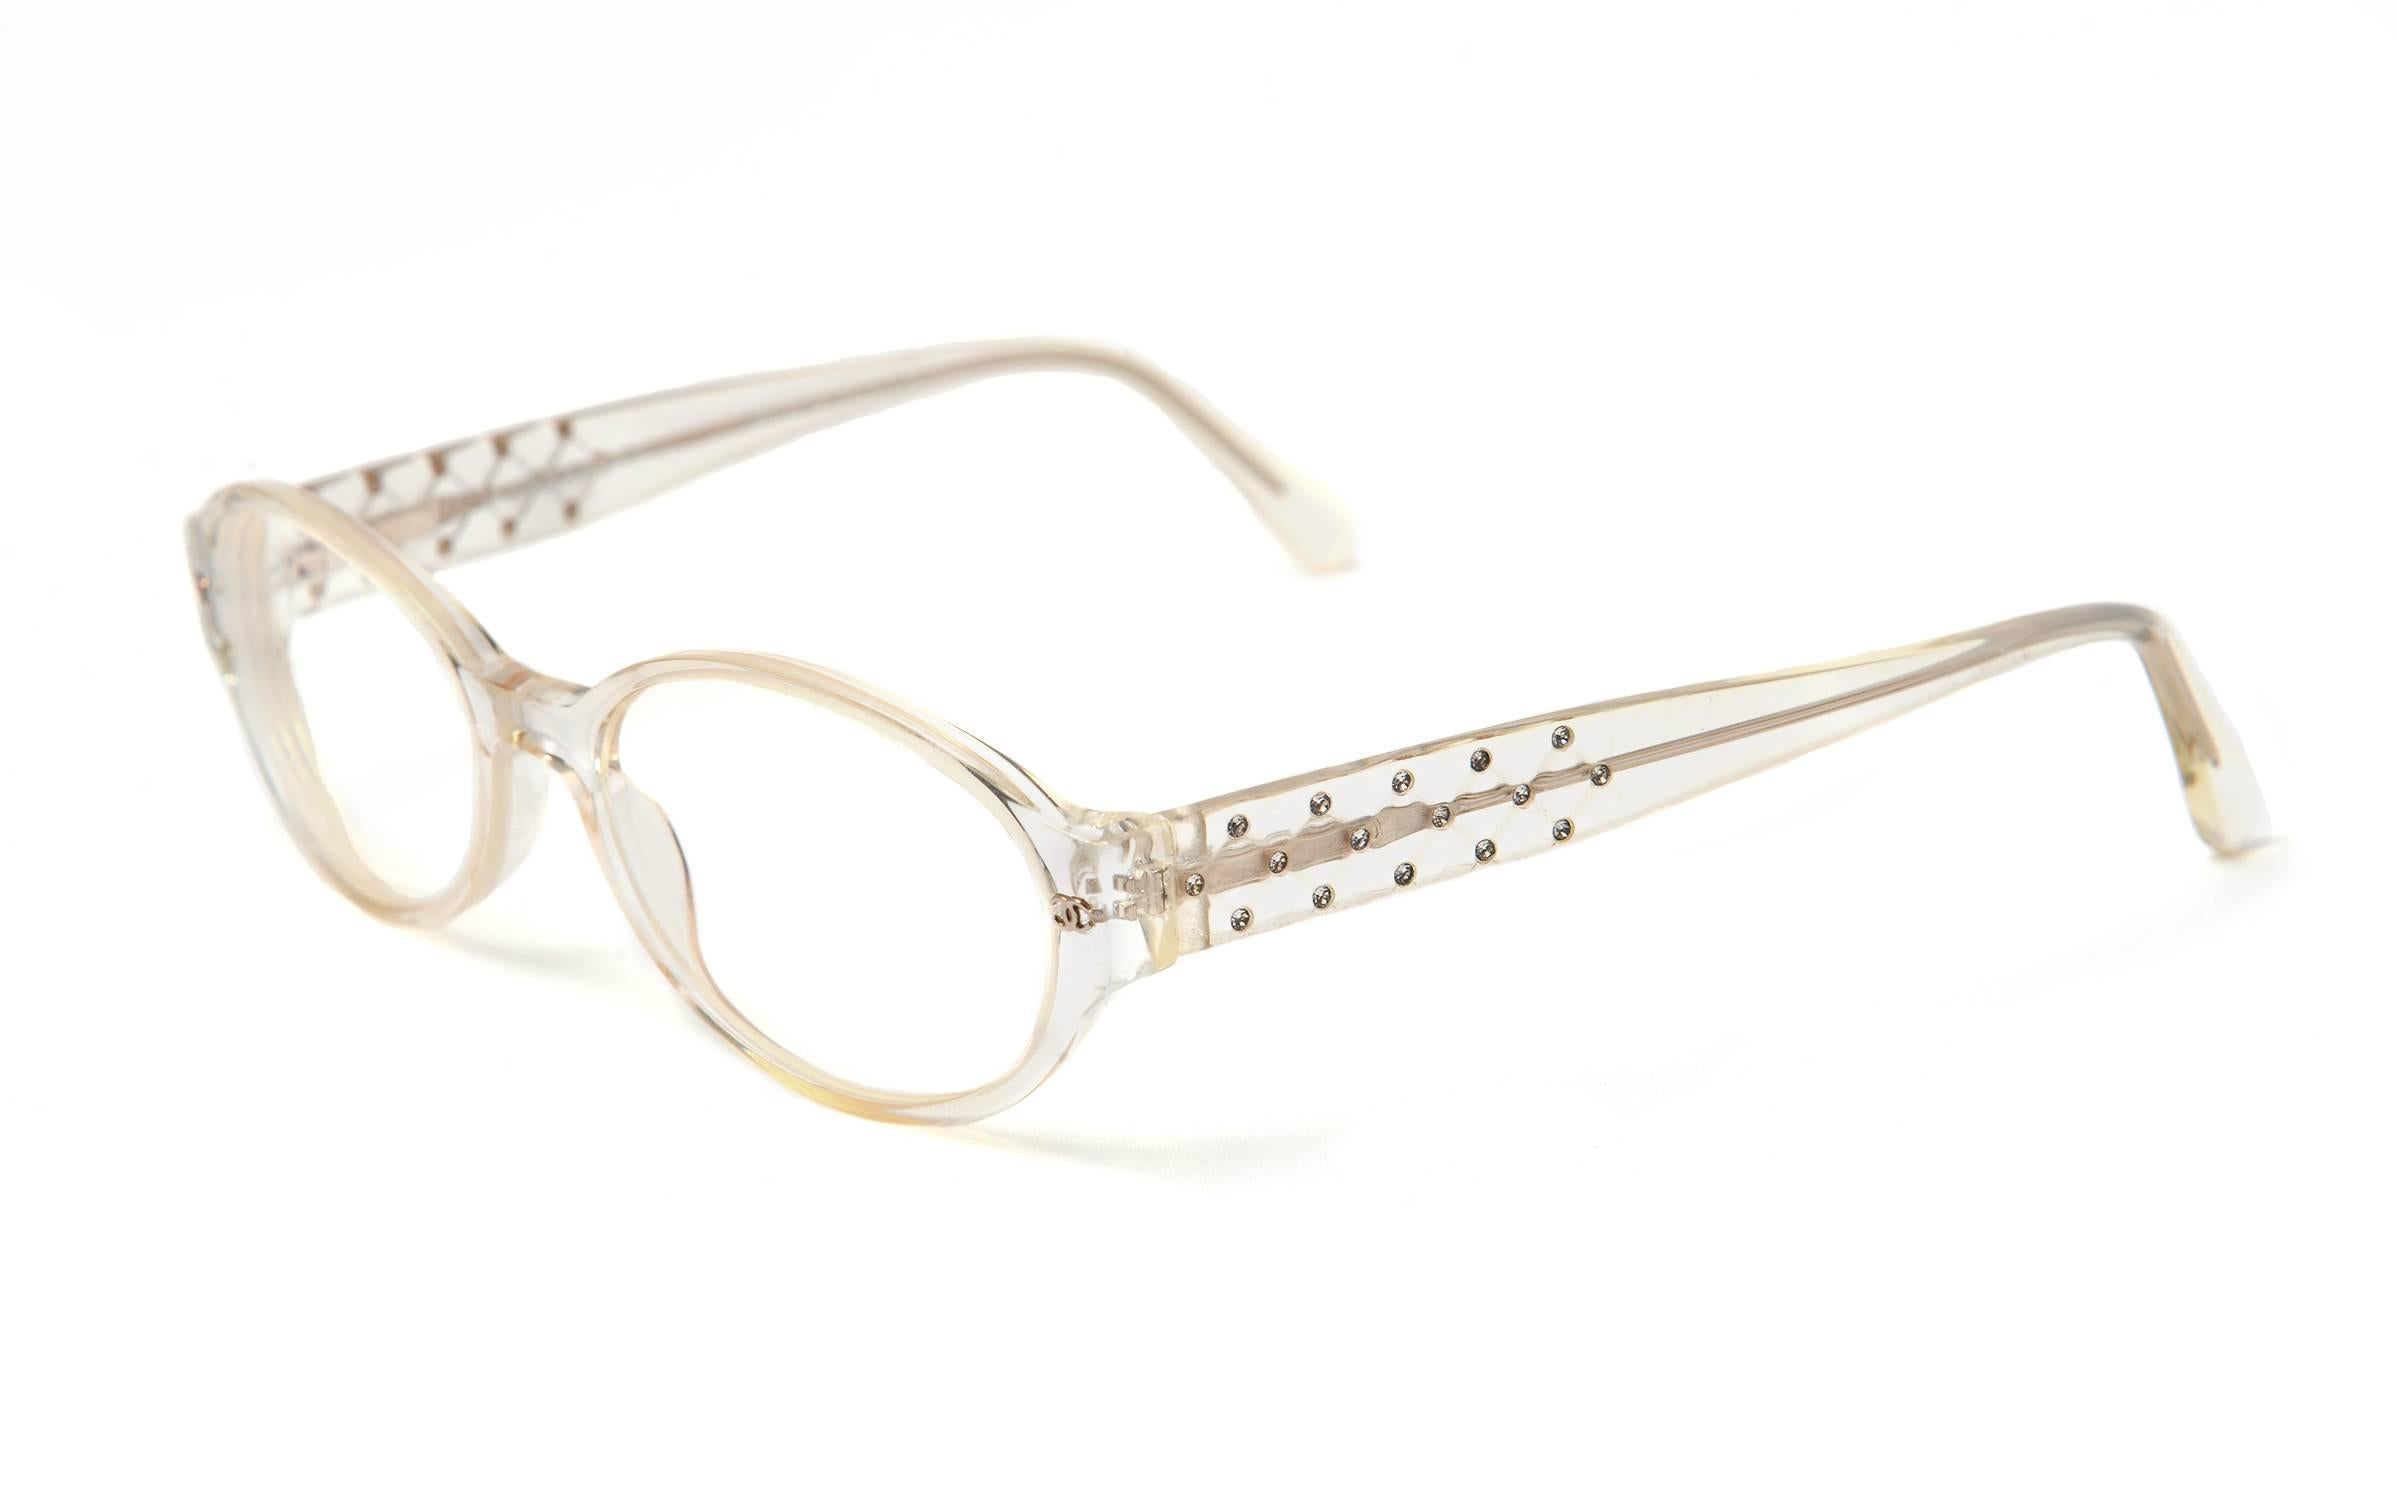 Clear Chanel Rhinestone Eyeglasses. Made in Italy. C185865E. 3050-B. 660. 52/17/135. 

Vintage Chanel glasses. These crystal-clear Chanel glasses have a thick, high-set bridge, and feature crystal rhinestones on the sides of the frame. 
The